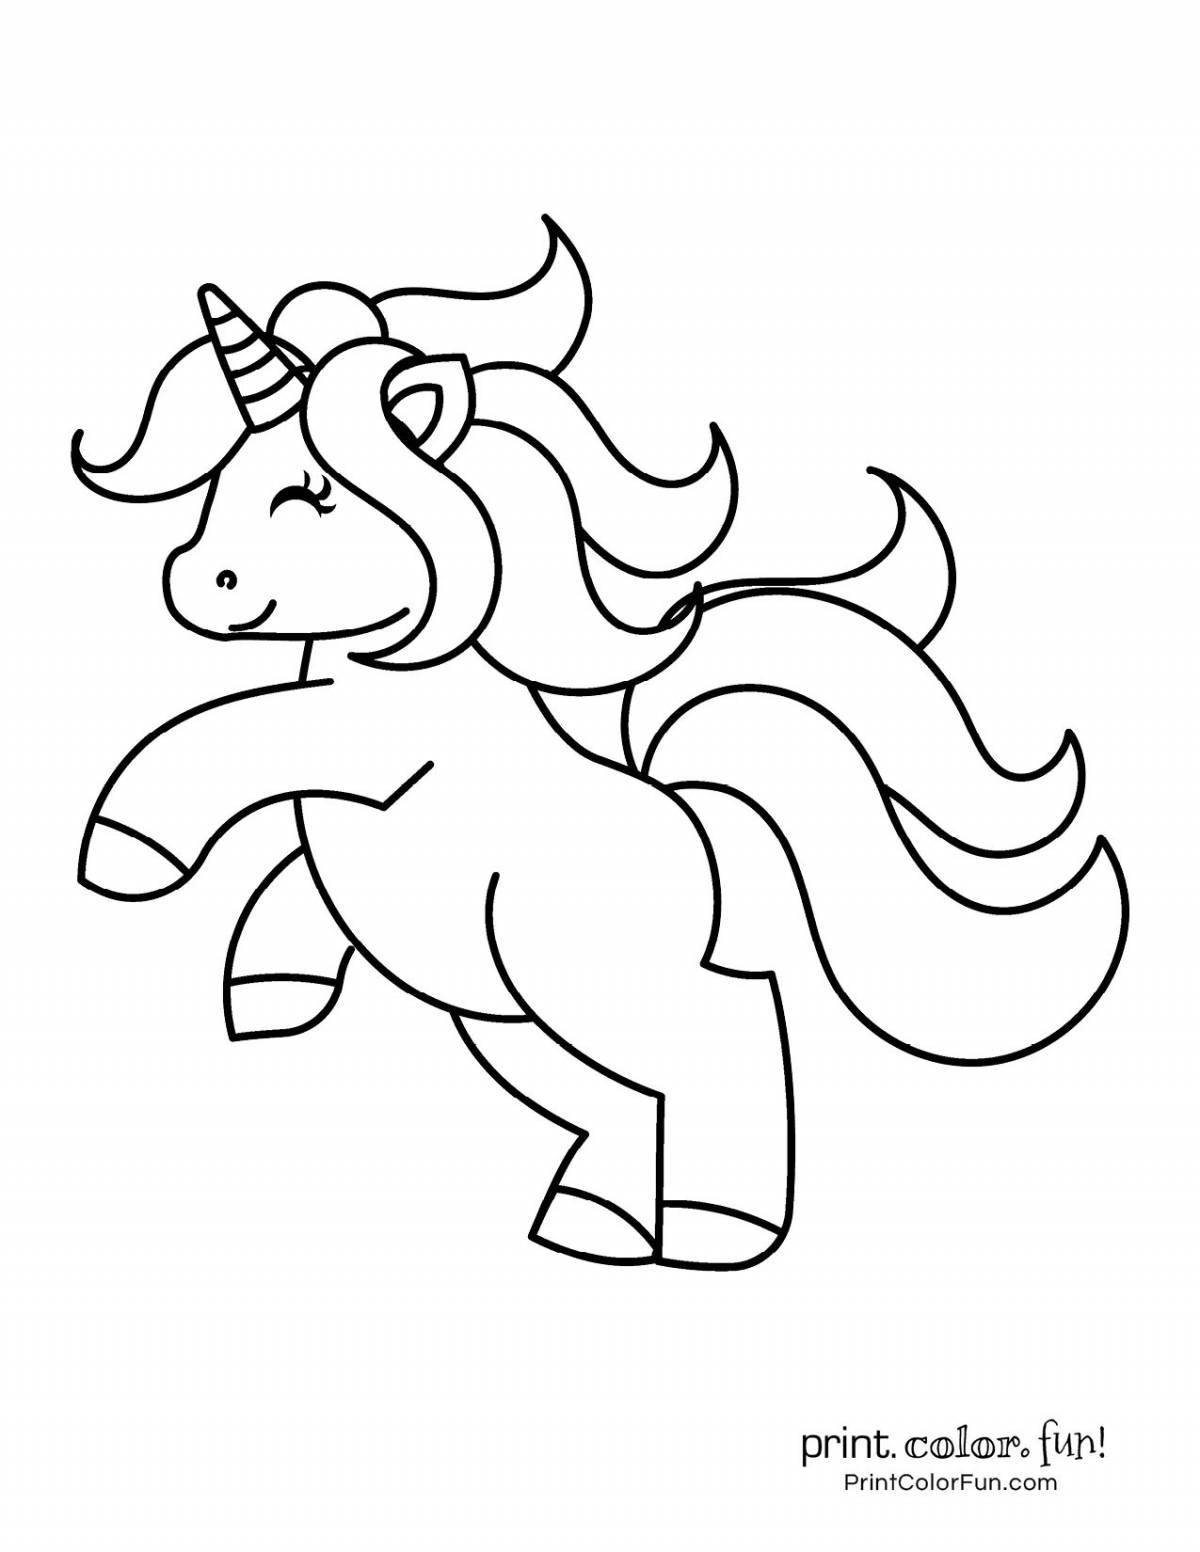 Awesome coloring how to draw a unicorn